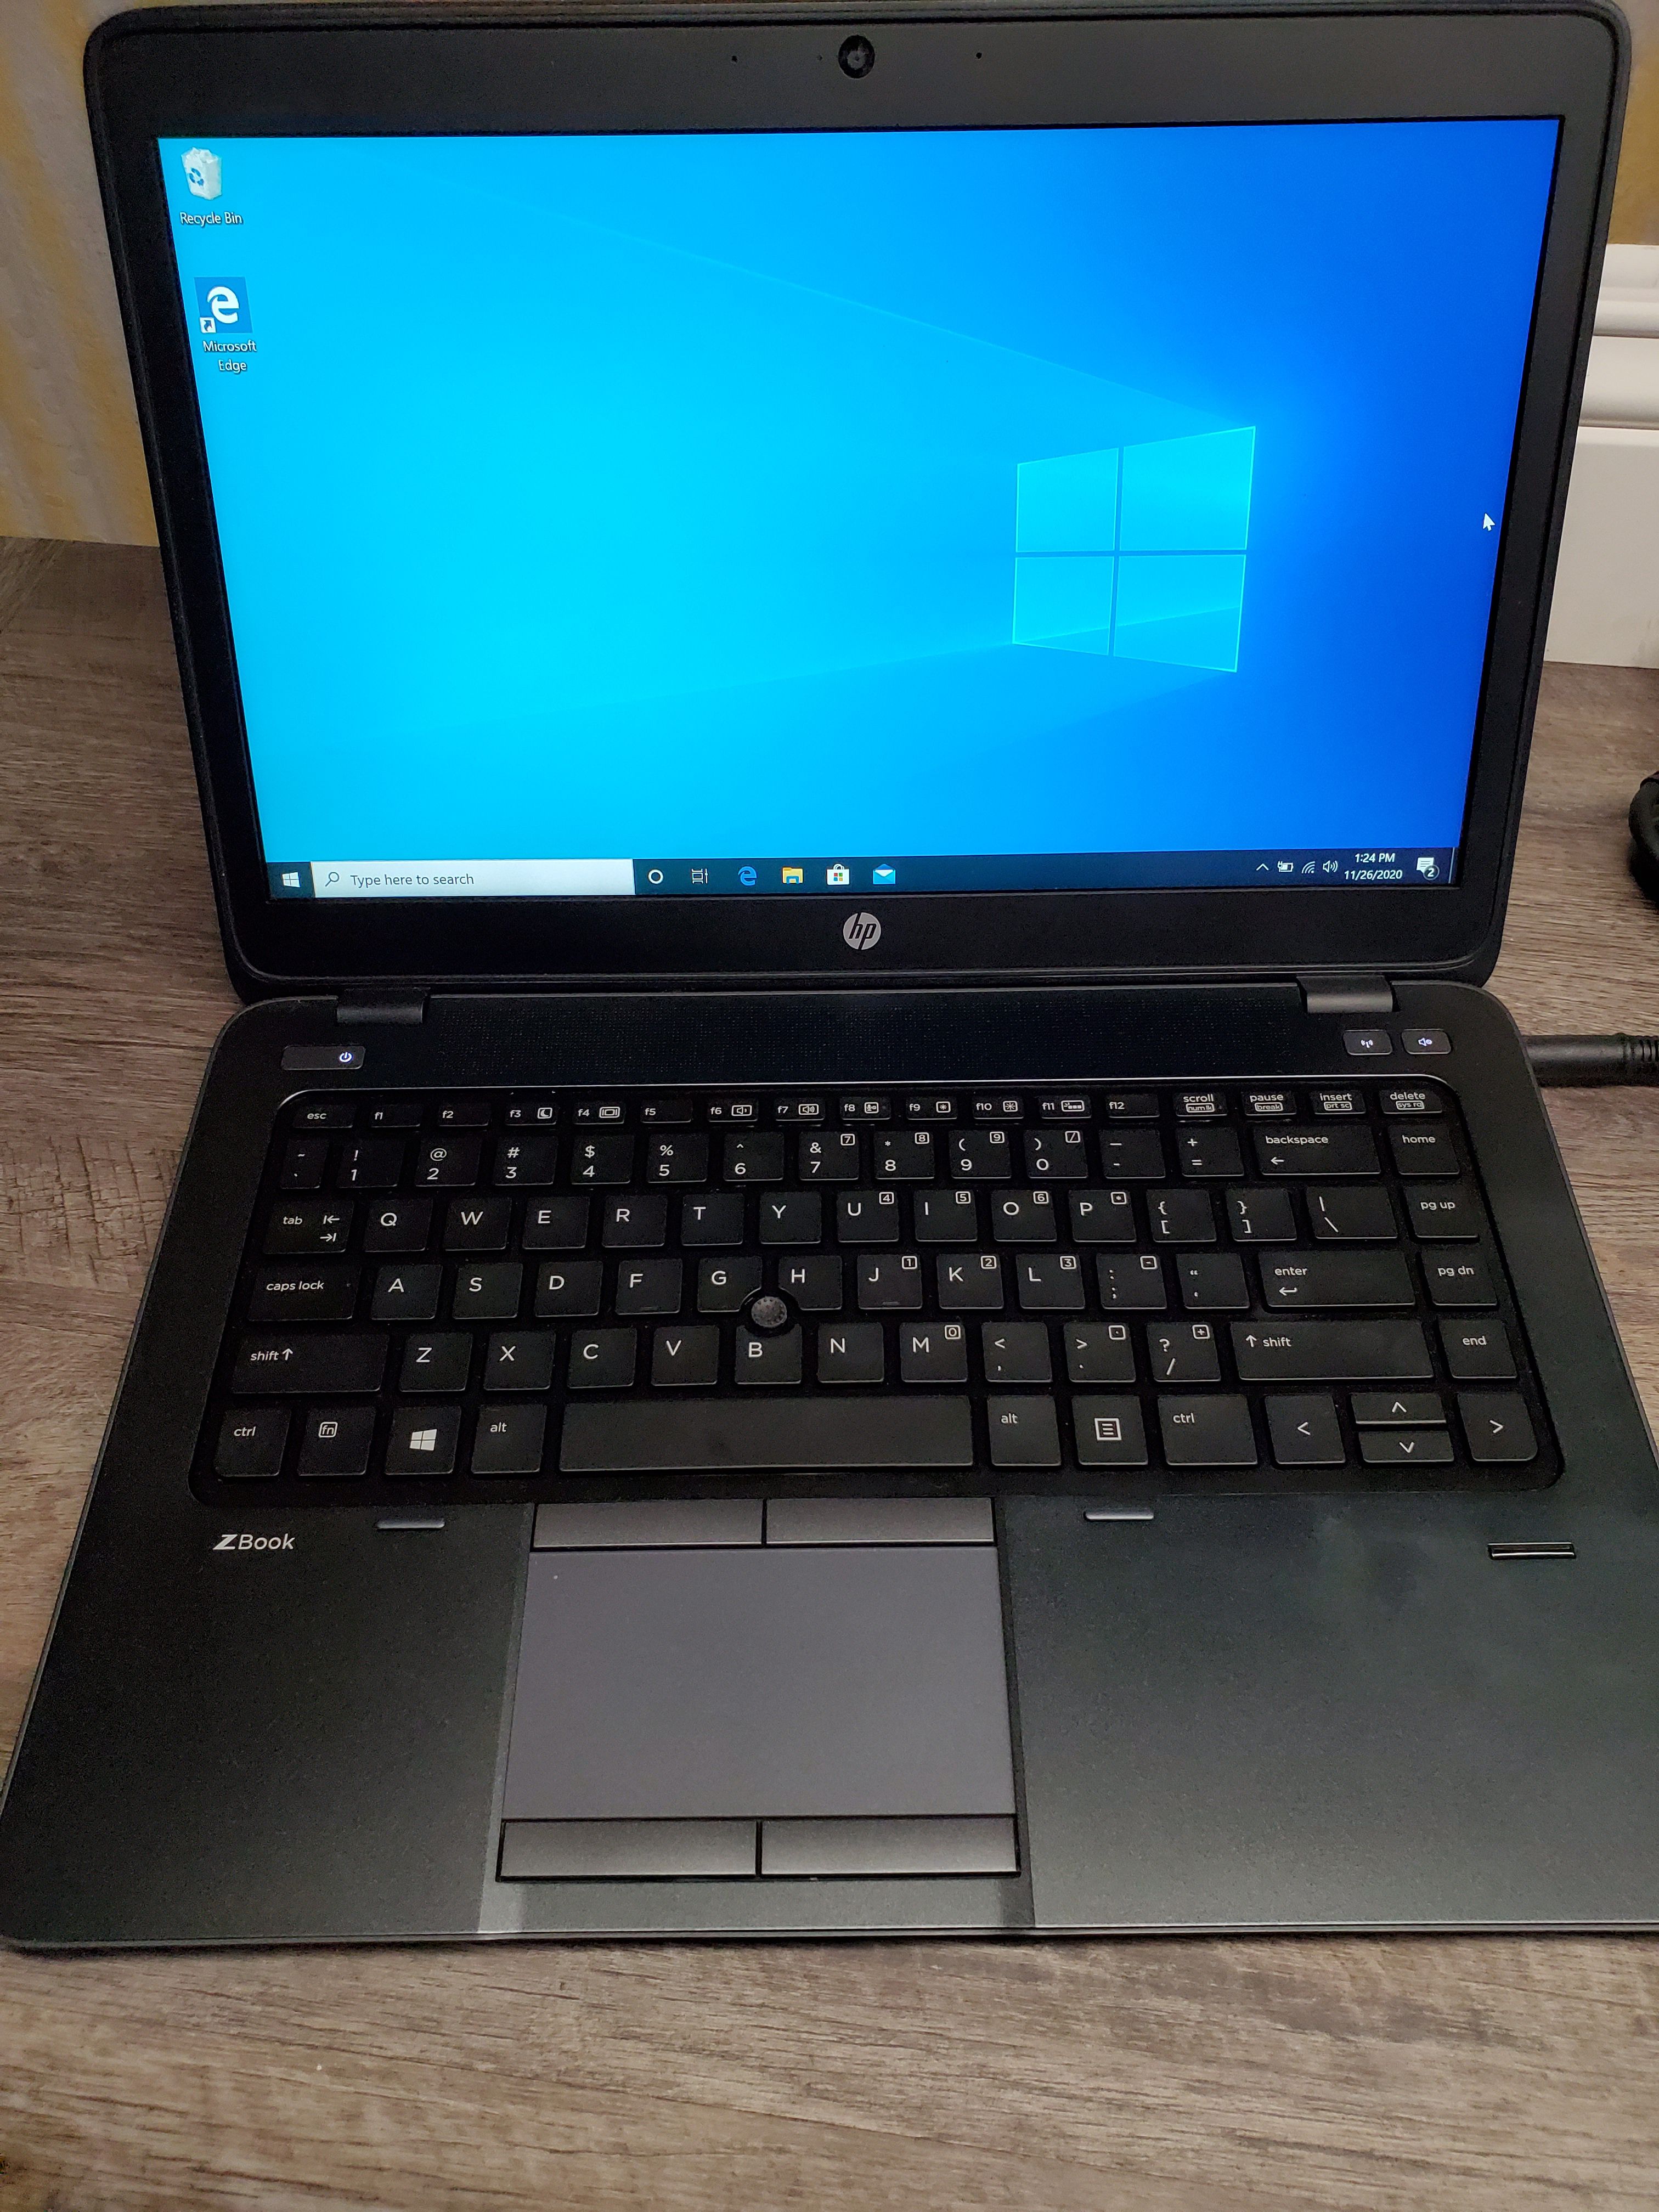 HB ZBook Laptop with Intel i7